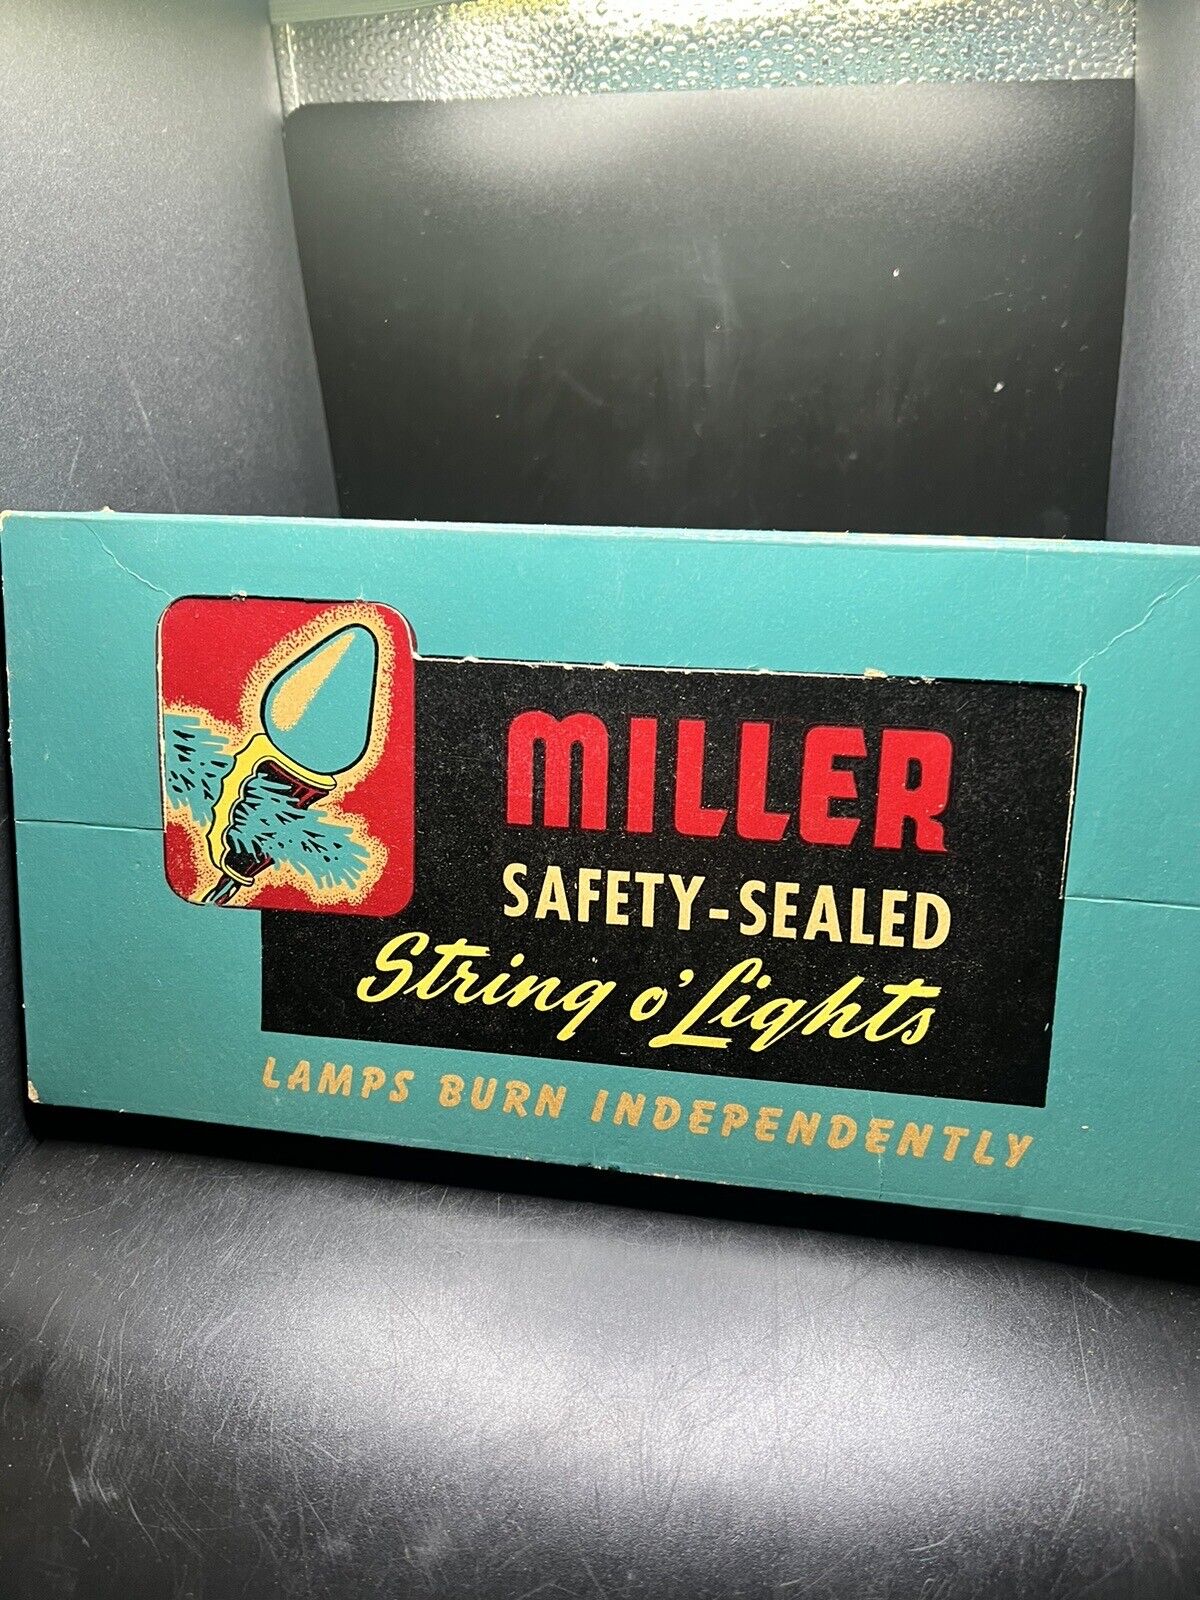 Rare Miller Christmas Lights Box In Turquoise